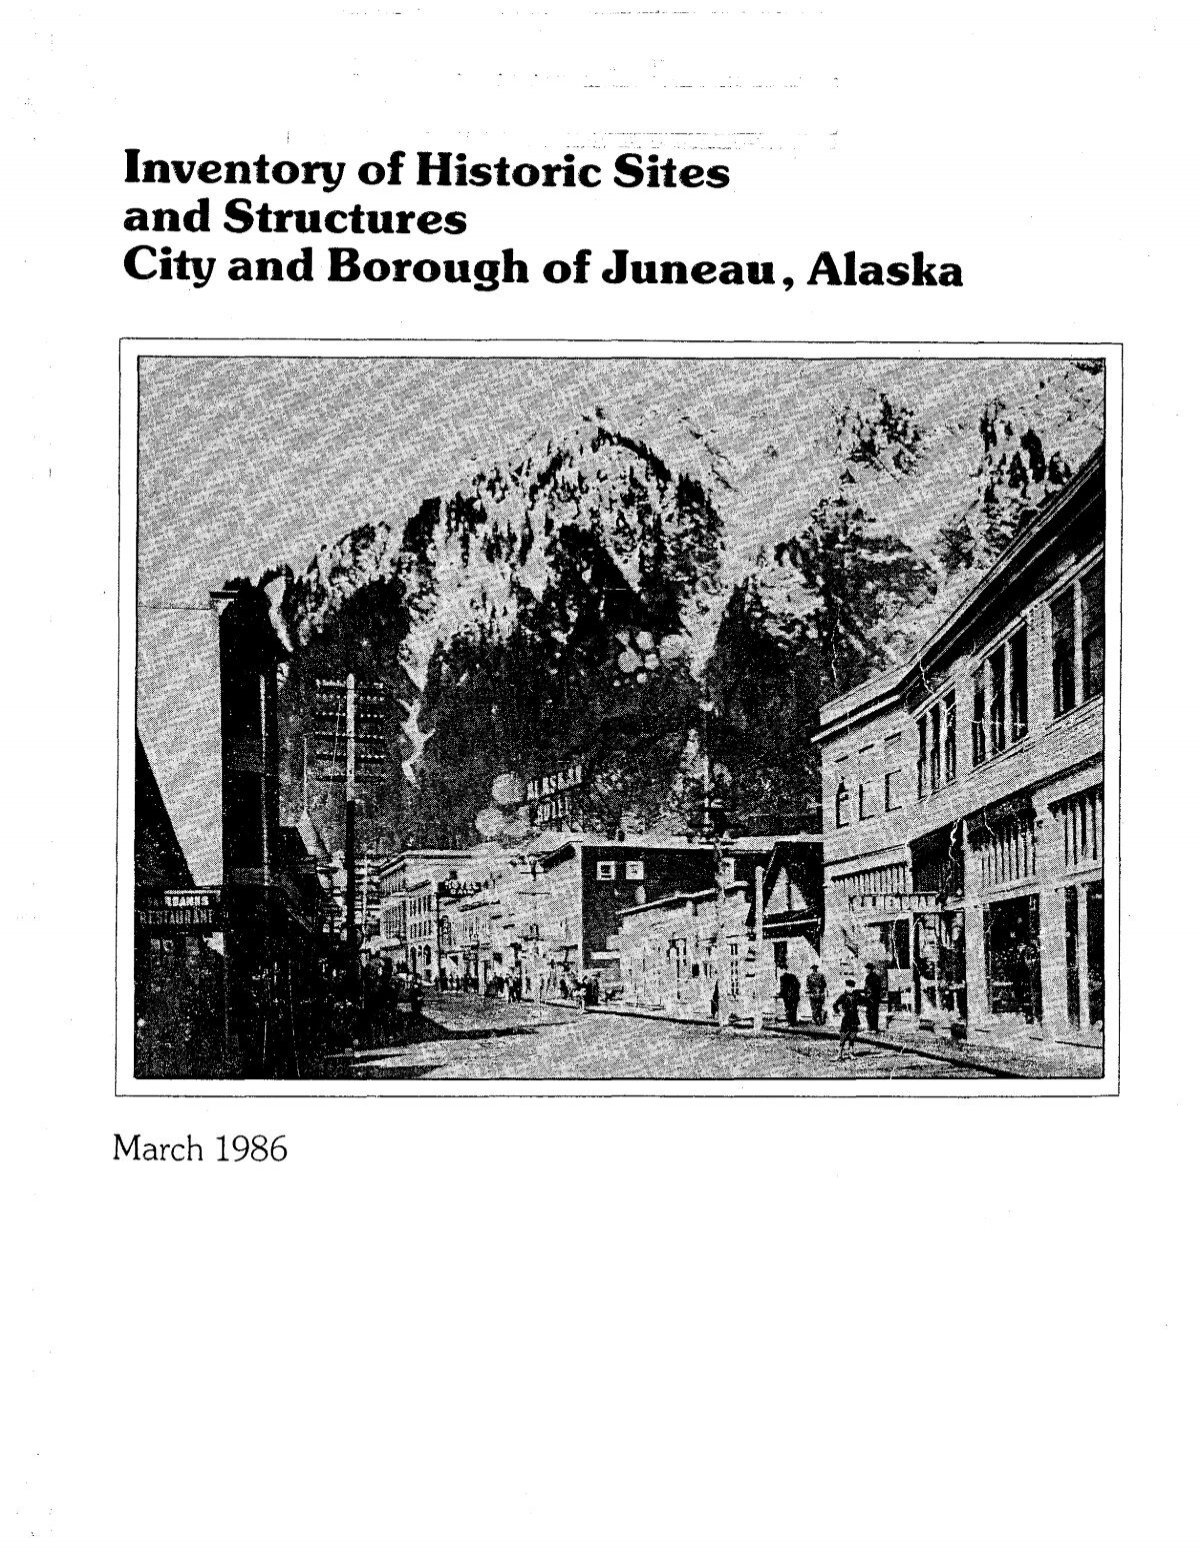 Inventory of Historic Sites and Structures City and Borough of